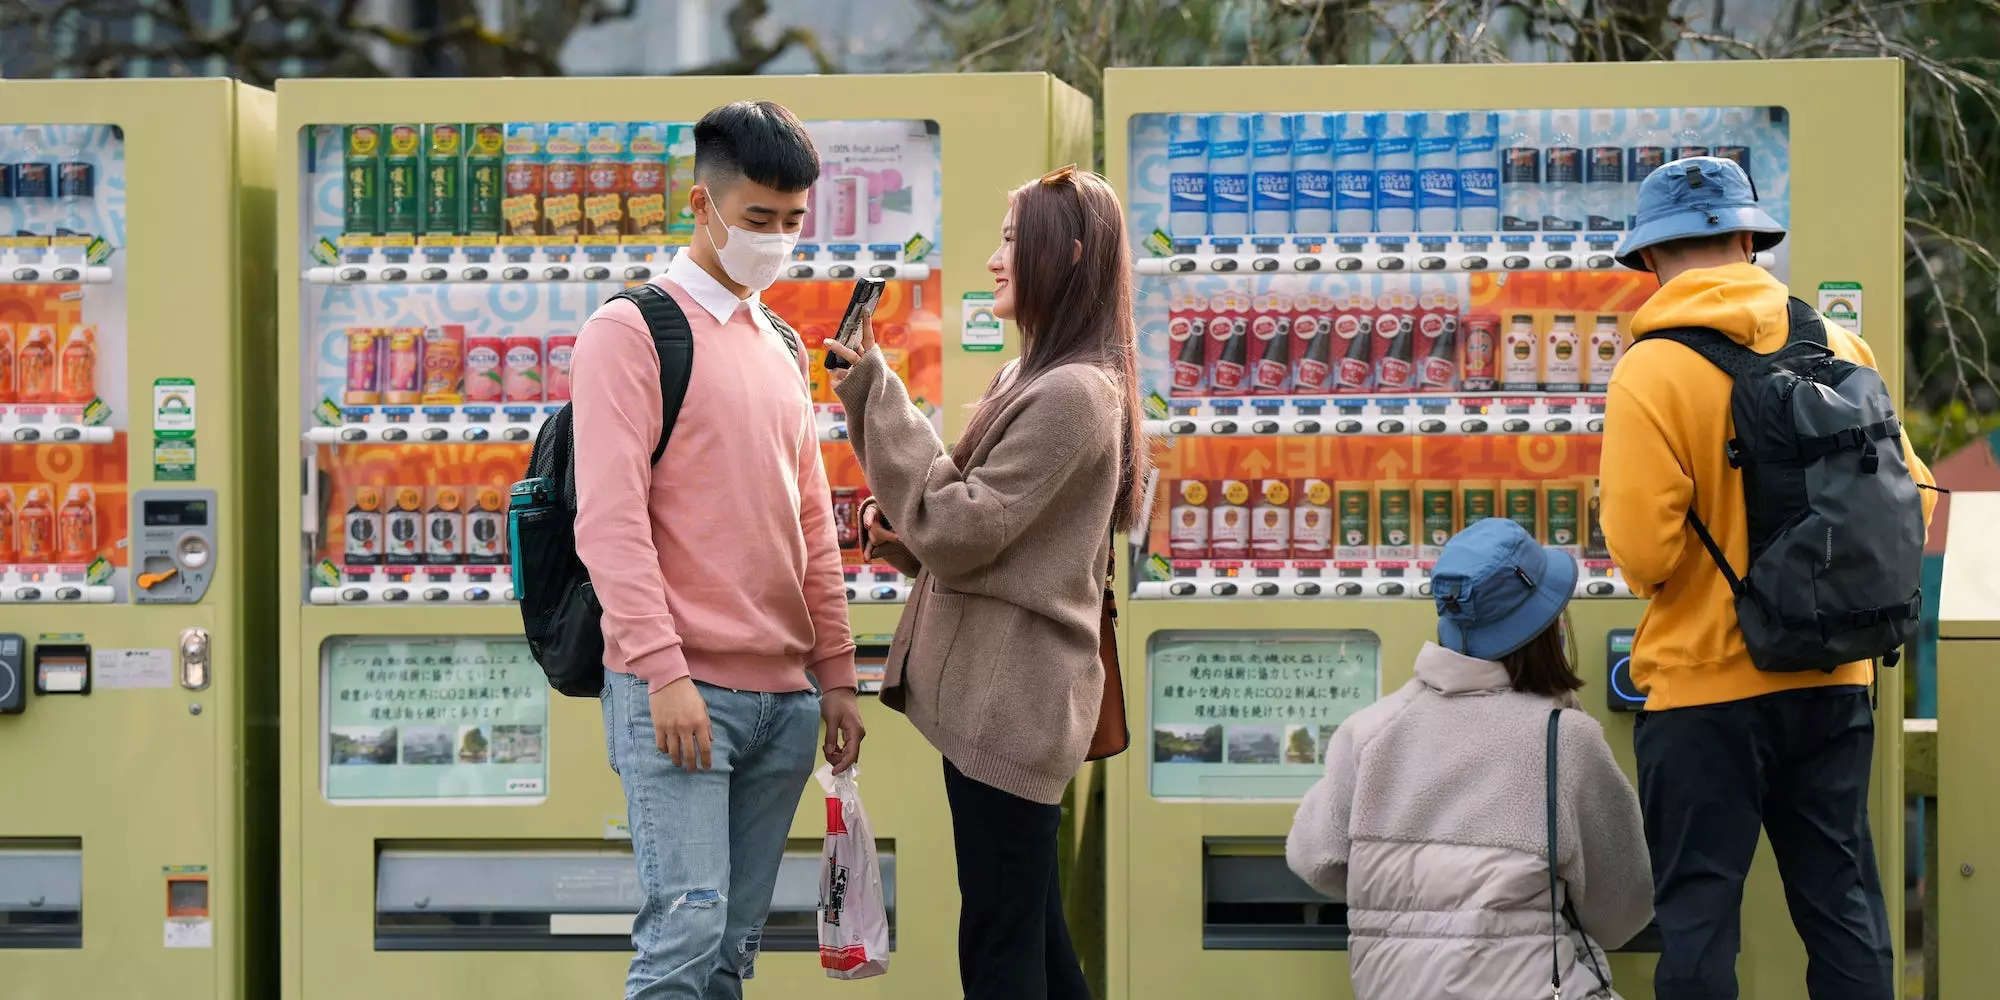 Japan introduced vending machines that automatically give out free food in the event of an earthquake